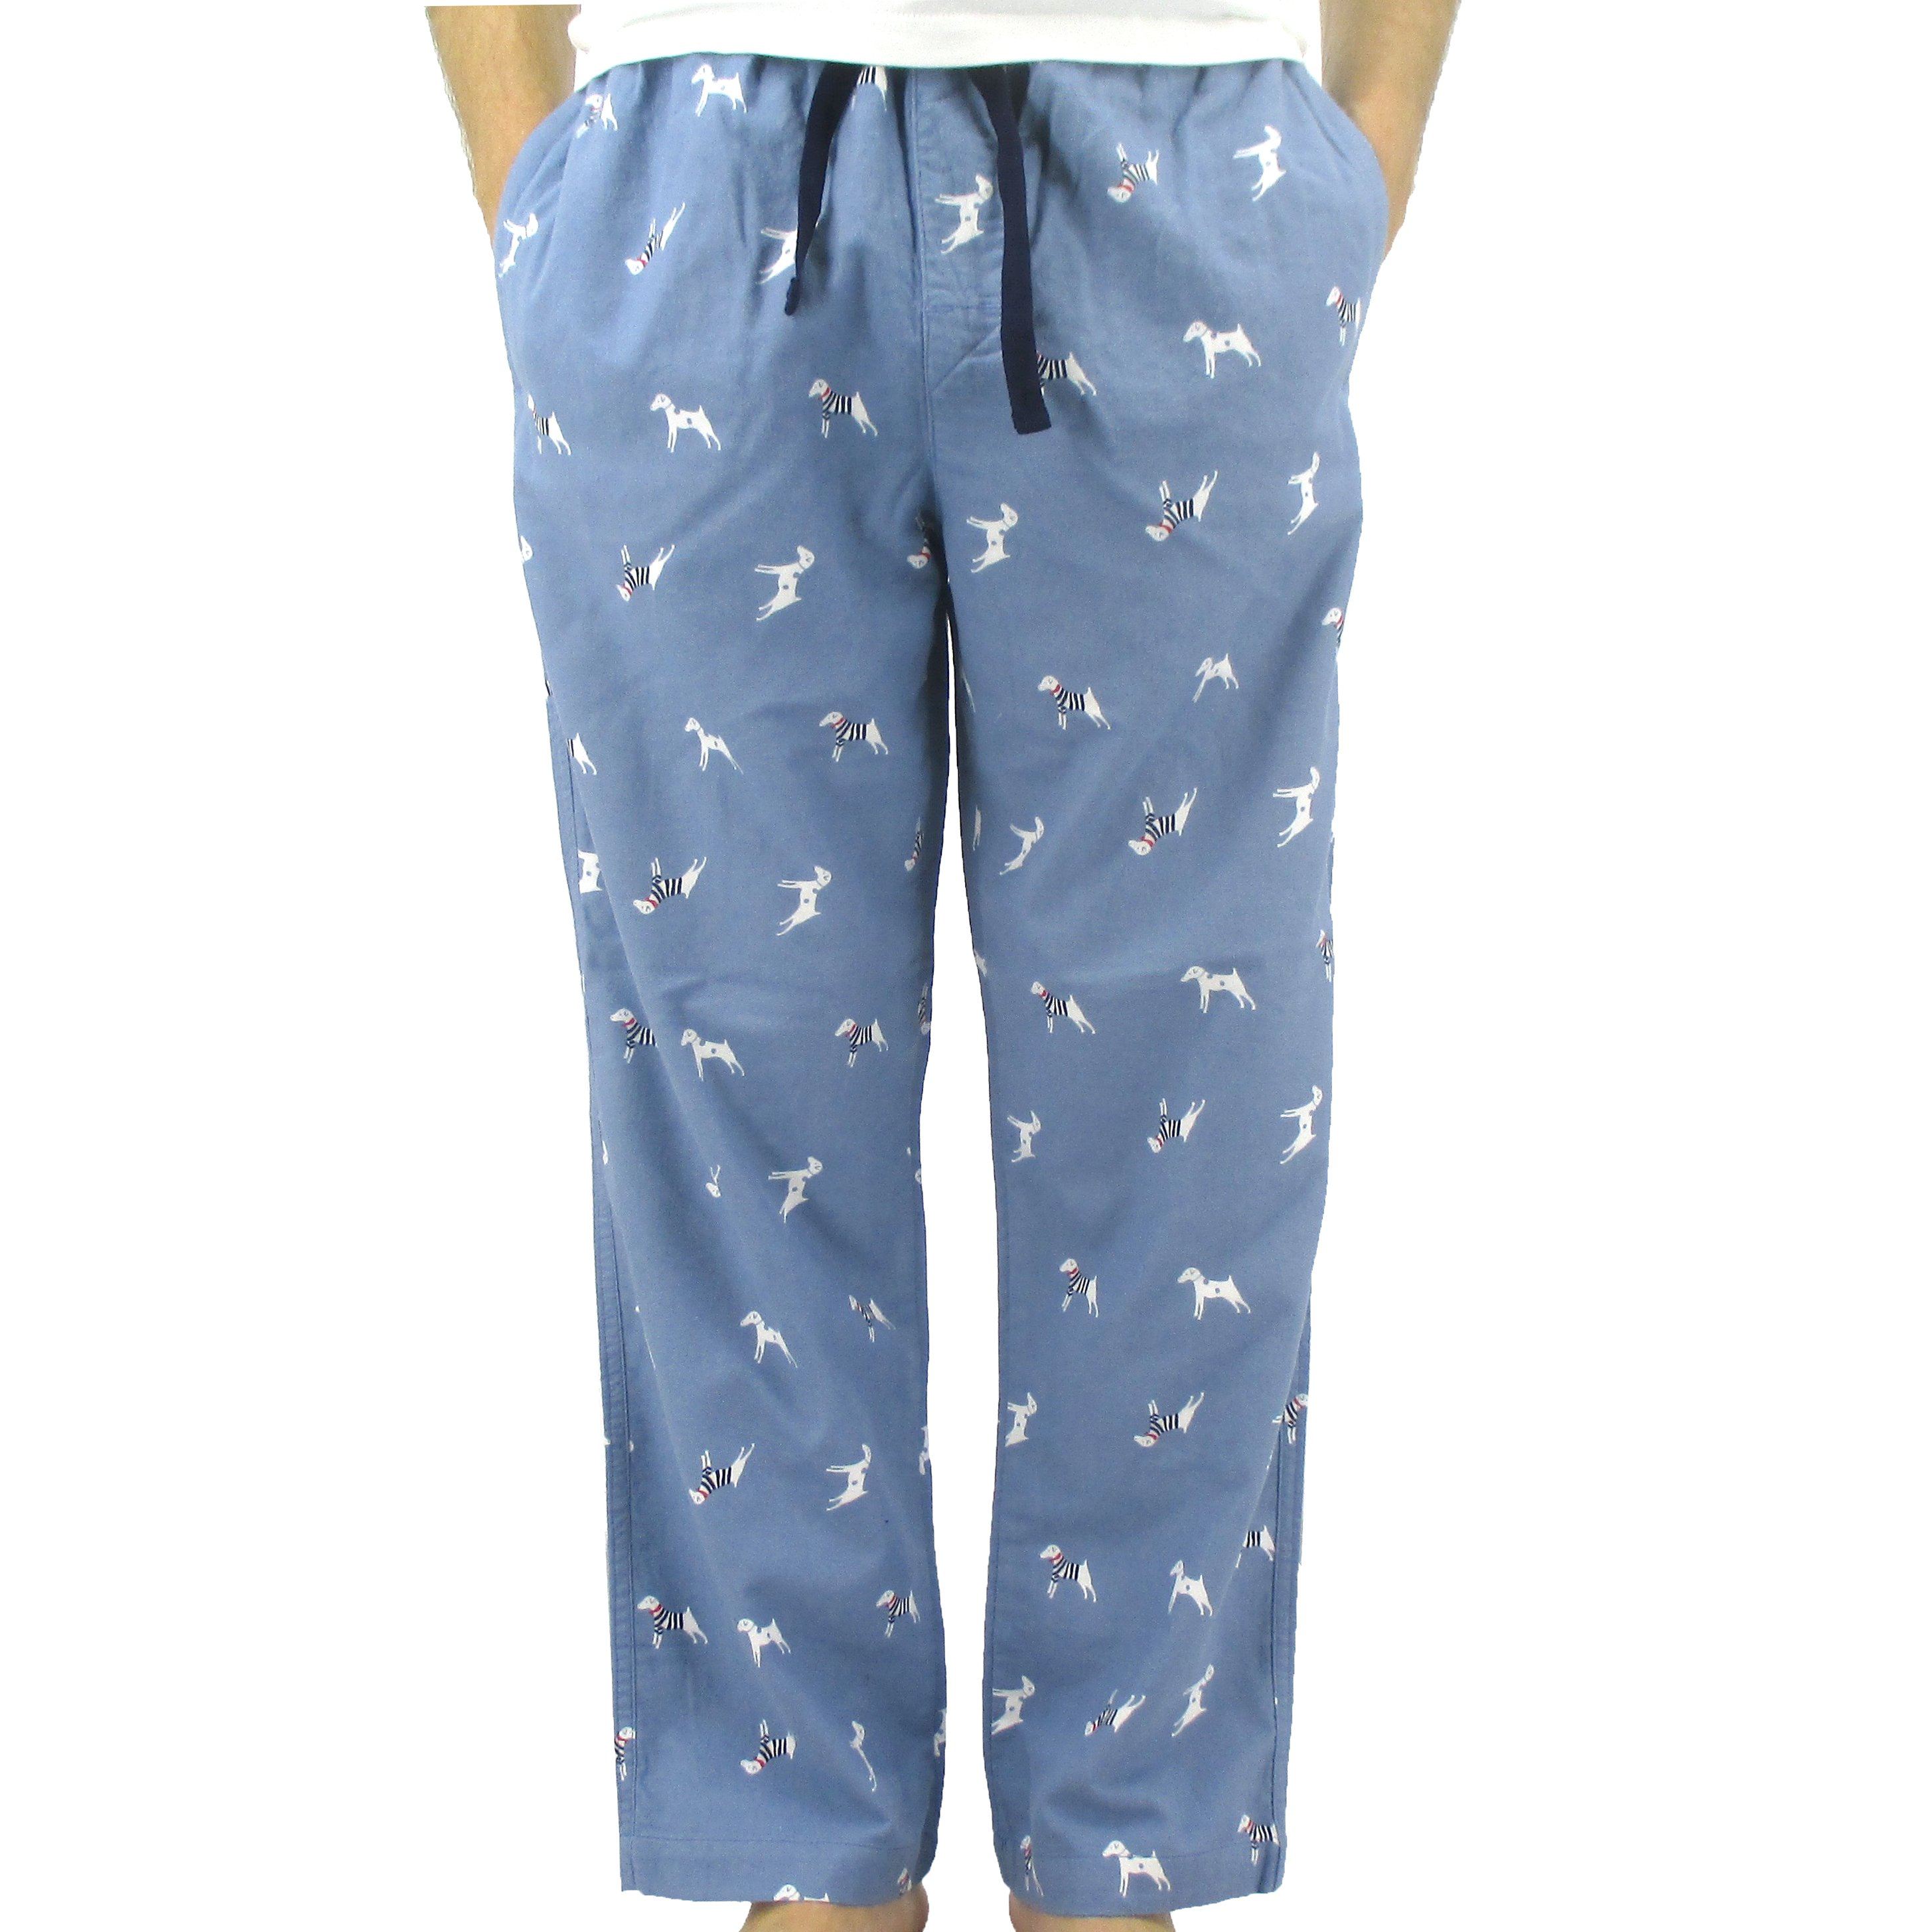 FINAL SALE - Holiday Dogs Flannel Drawstring Pajama Pant